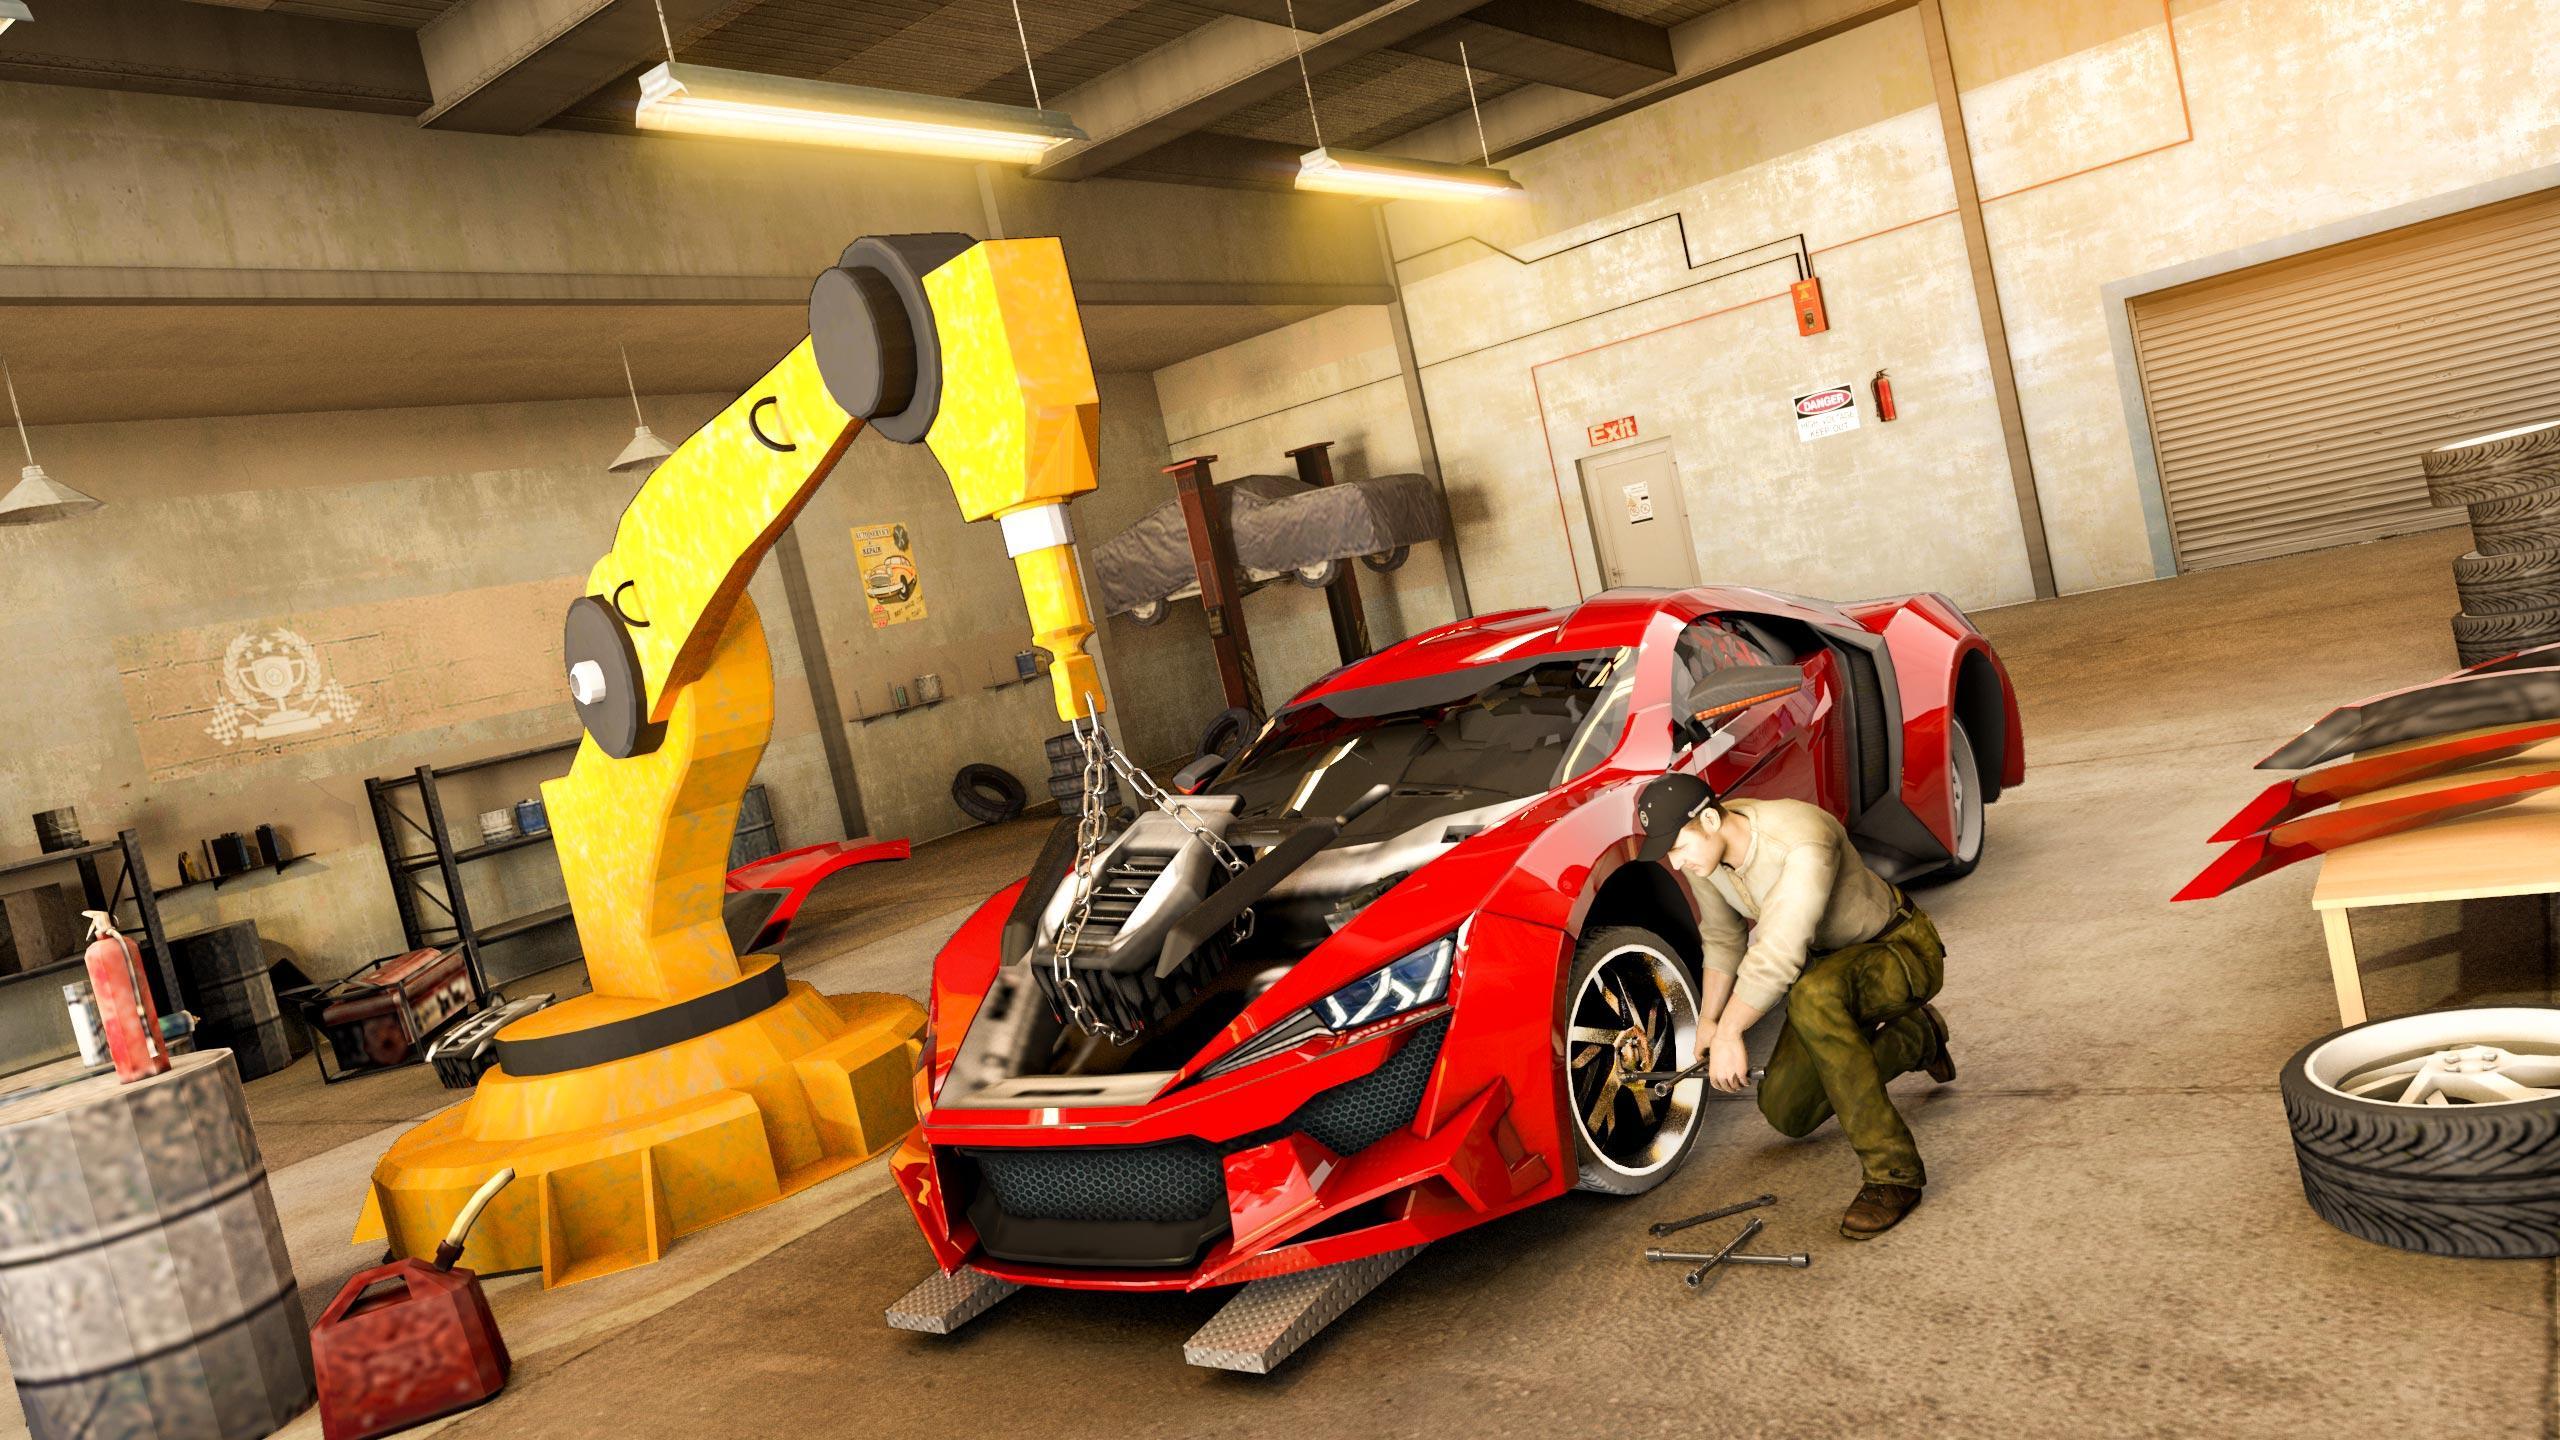 Car Mechanic Auto Workshop for Android - APK Download